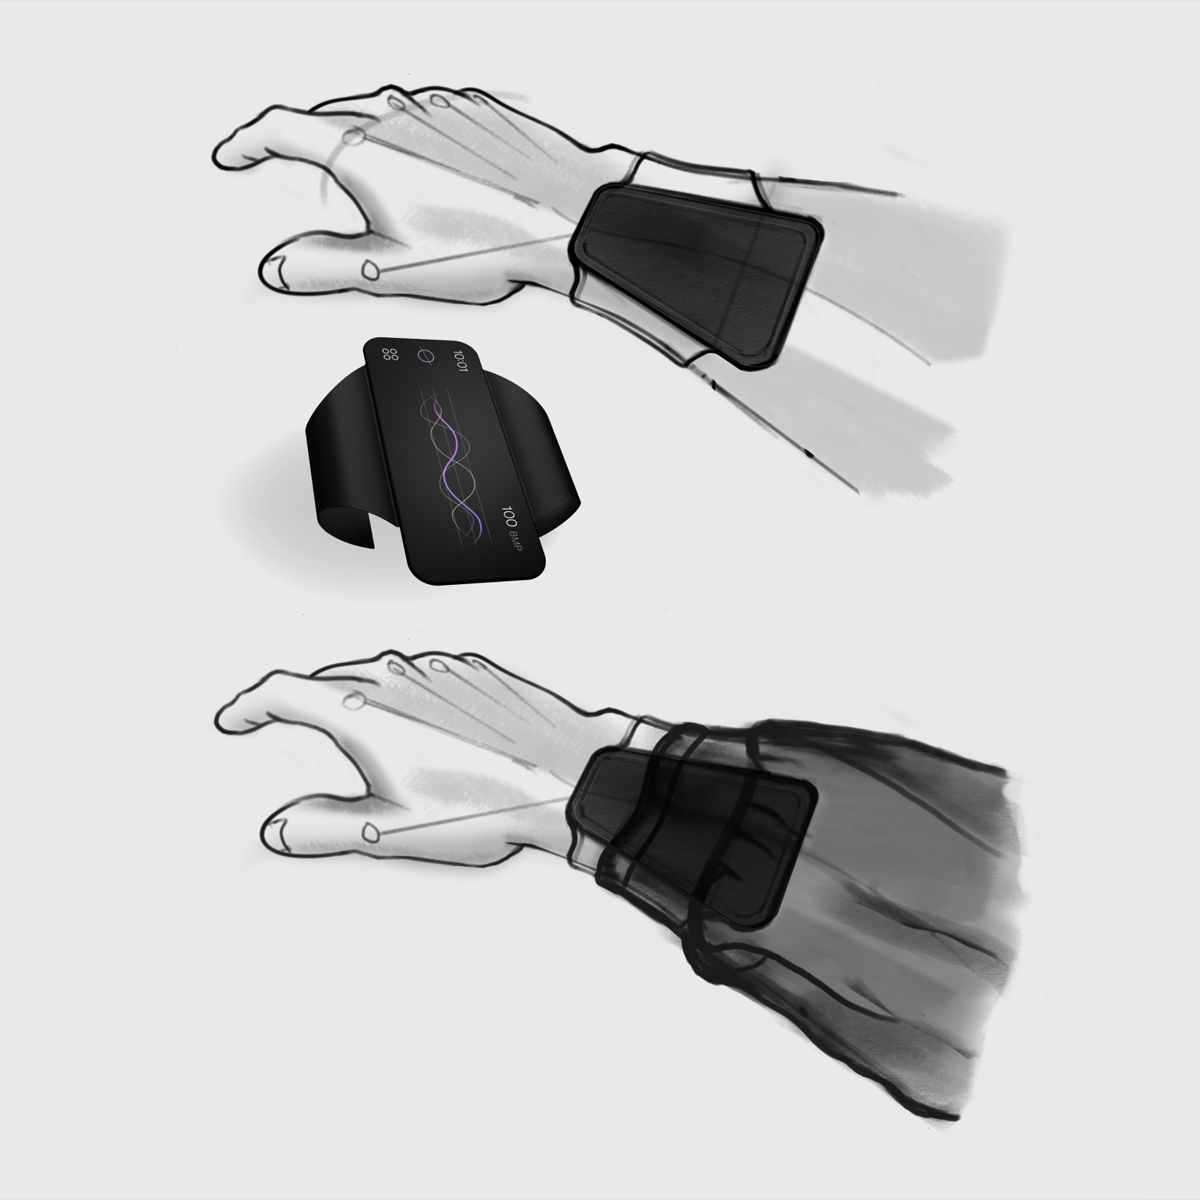 Sketches of the wearable device